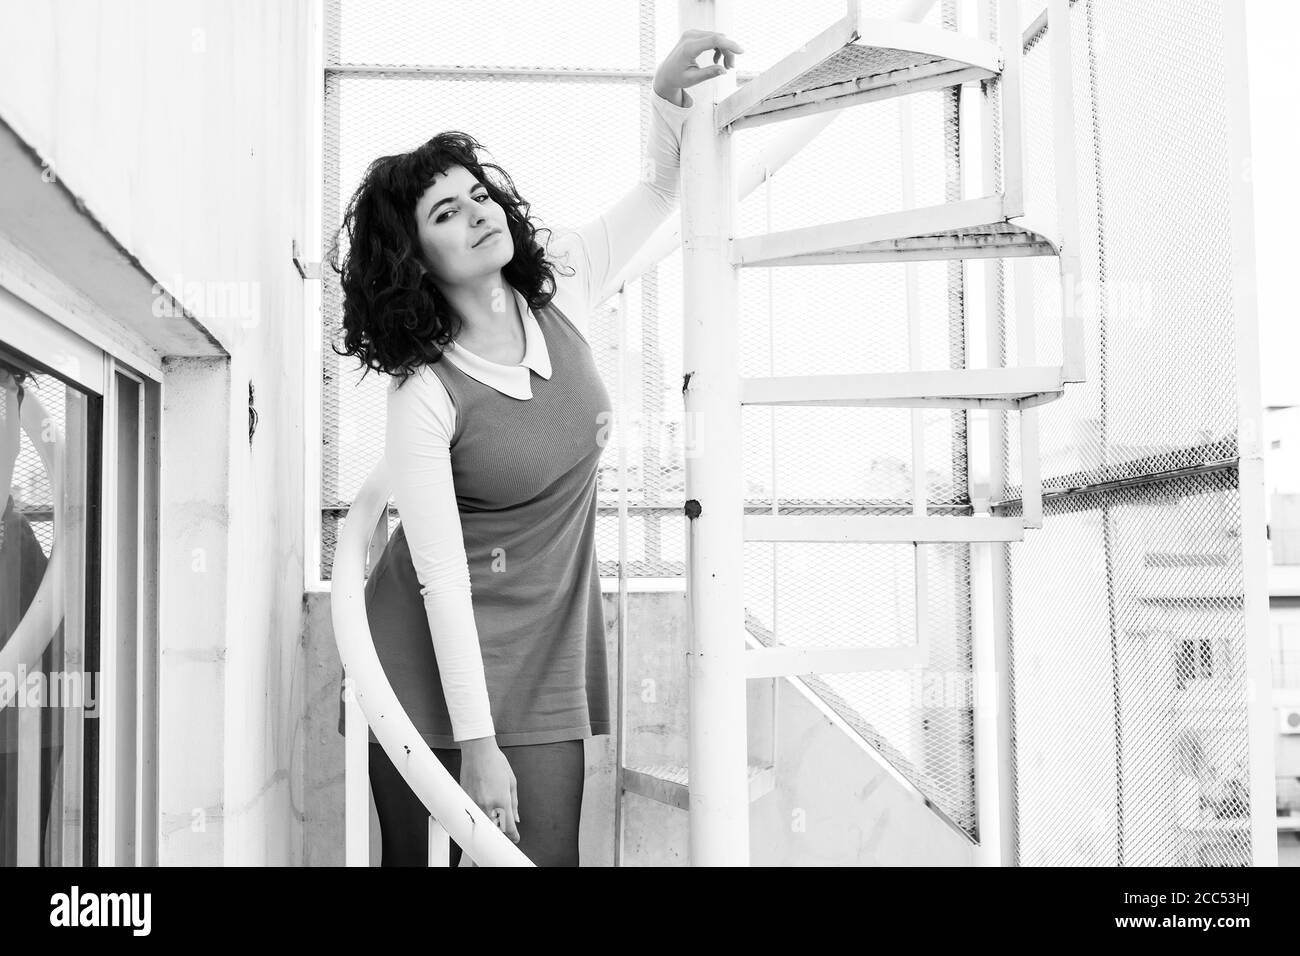 Portrait of a beautiful smiling young woman in an elegant dress standing on a metal stairs. Stock Photo